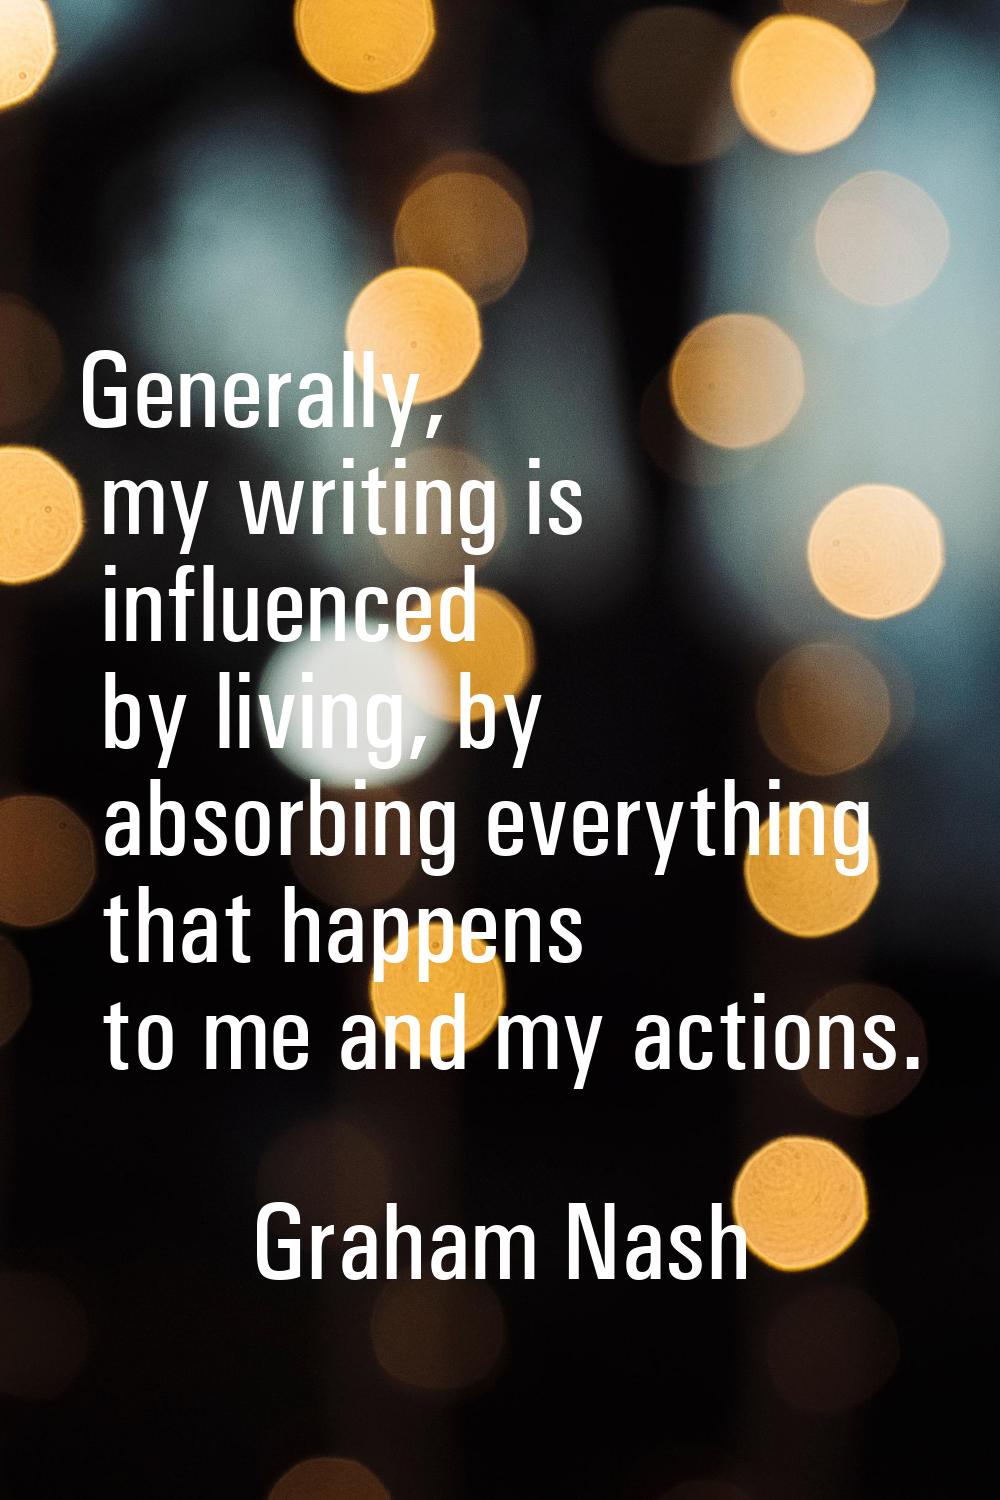 Generally, my writing is influenced by living, by absorbing everything that happens to me and my ac